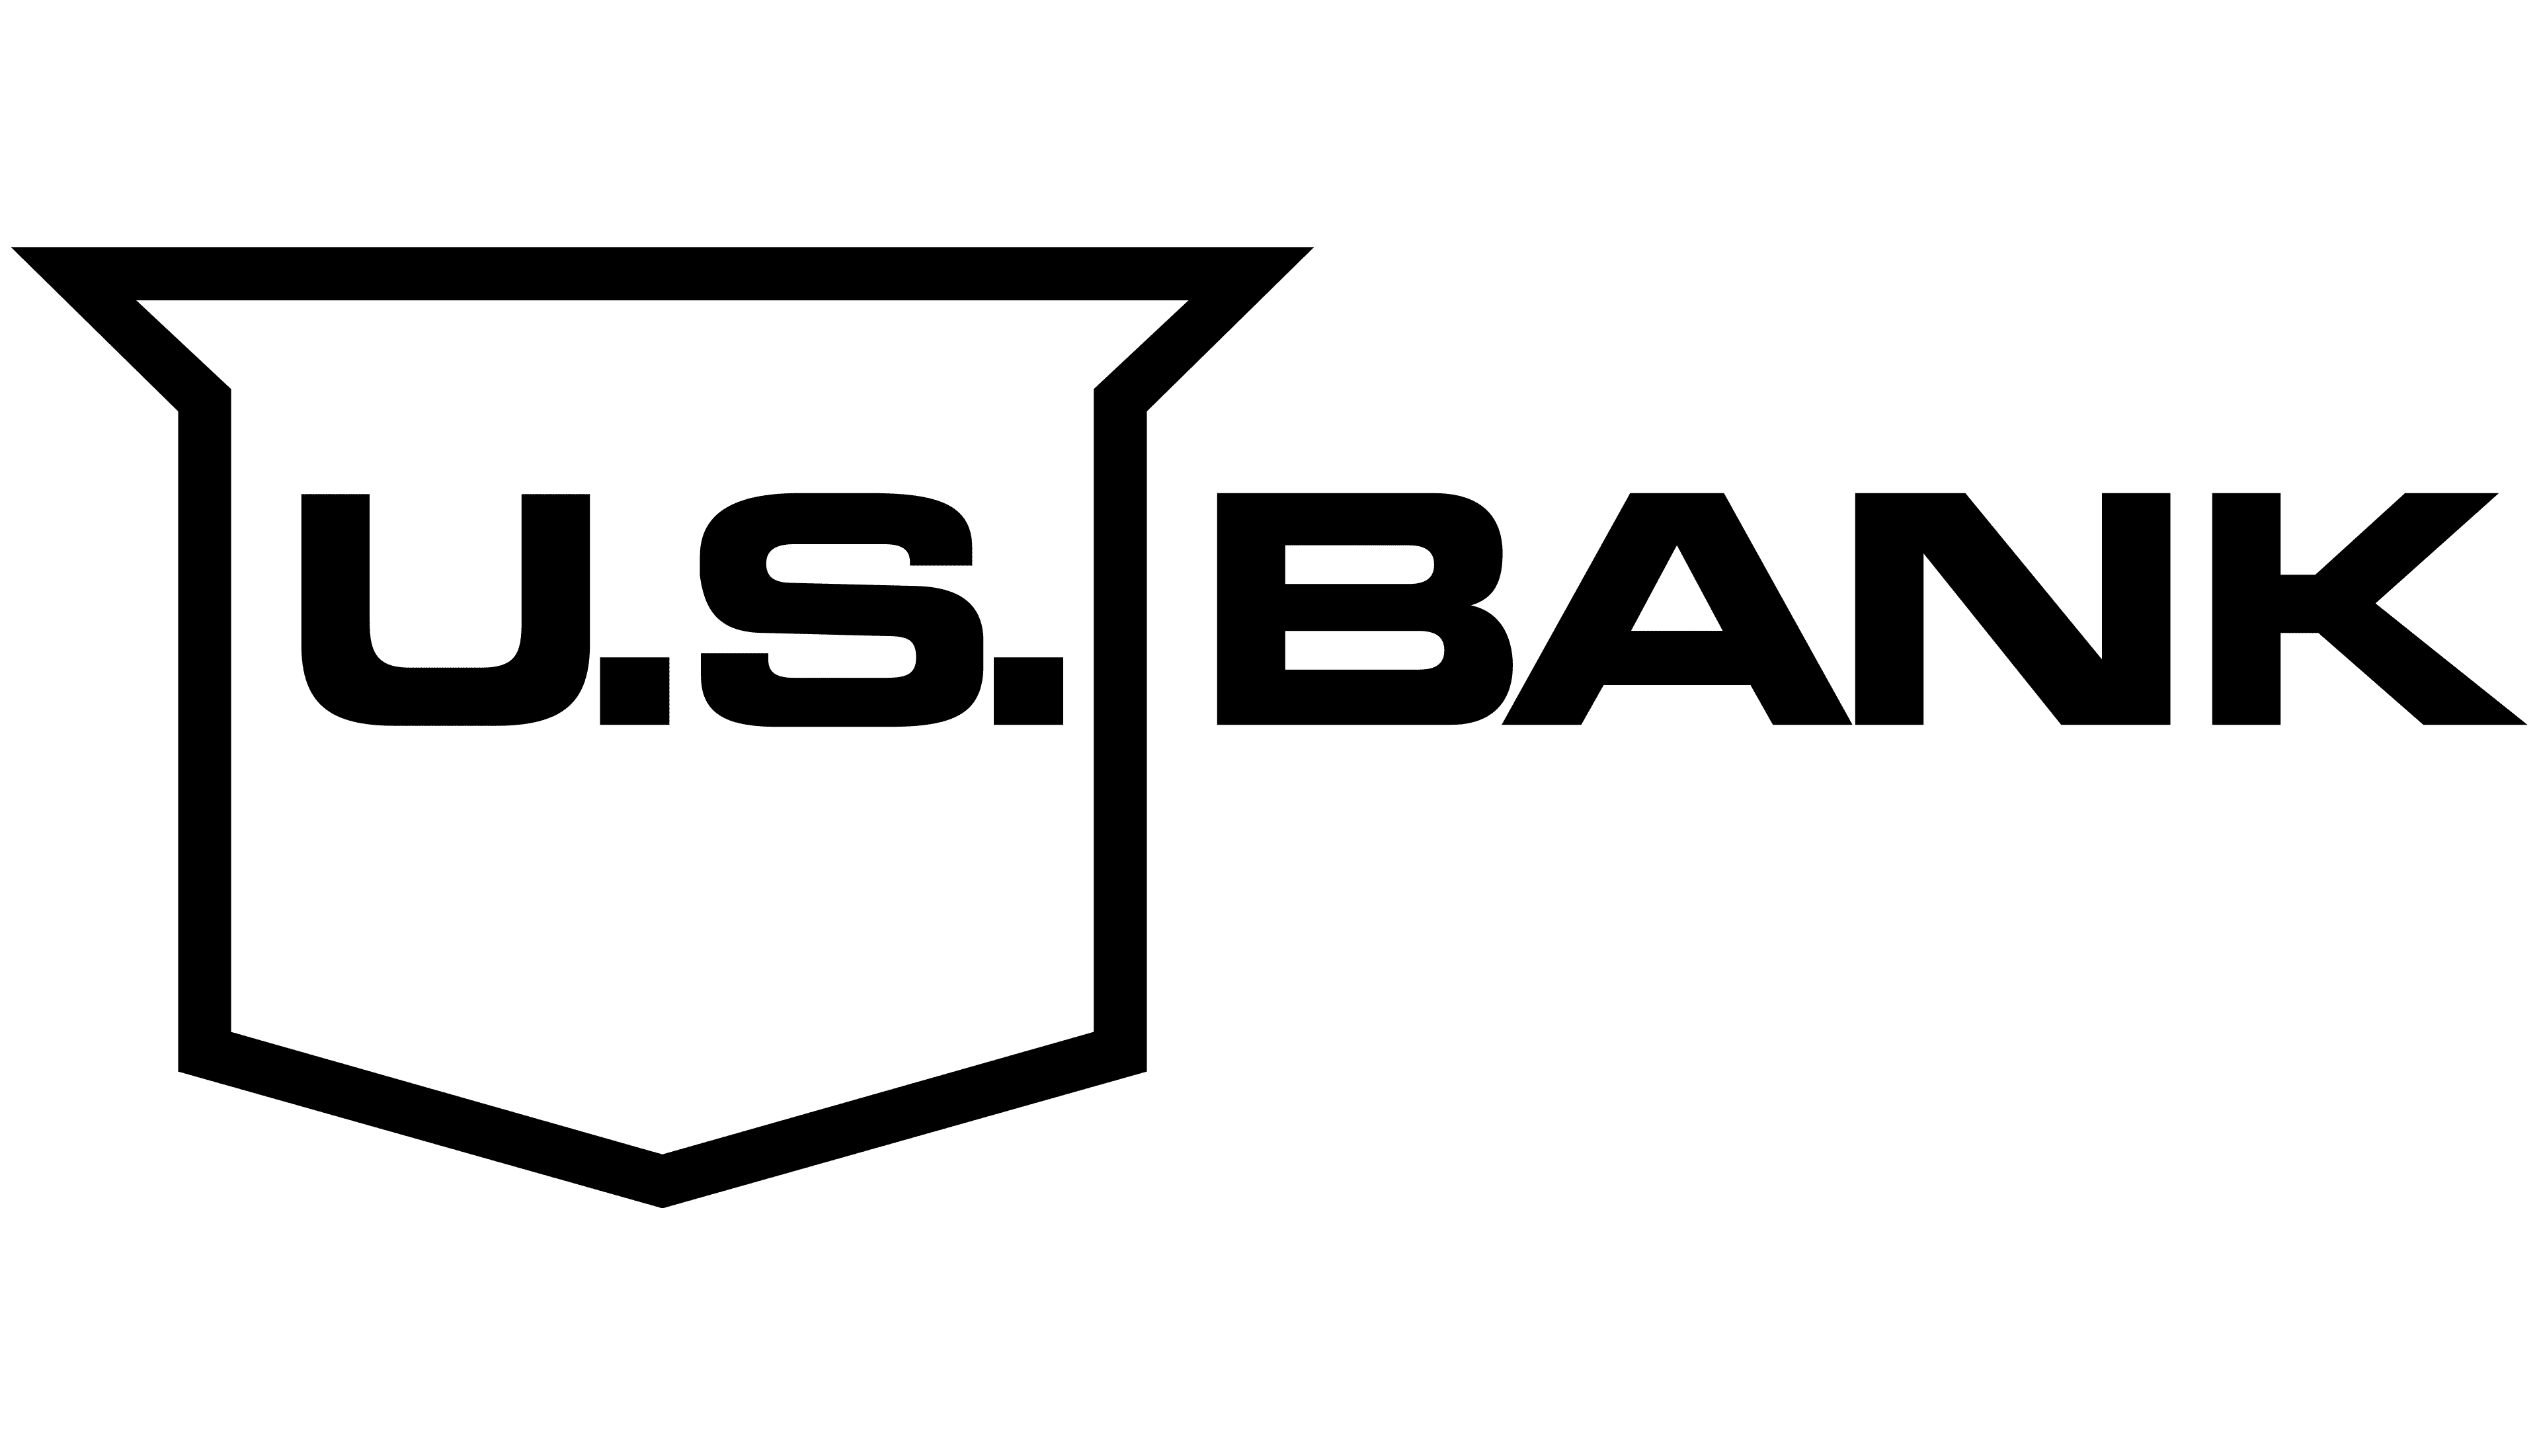 The US Bancorp Logo What Is The Symbol Of US Bancorp?